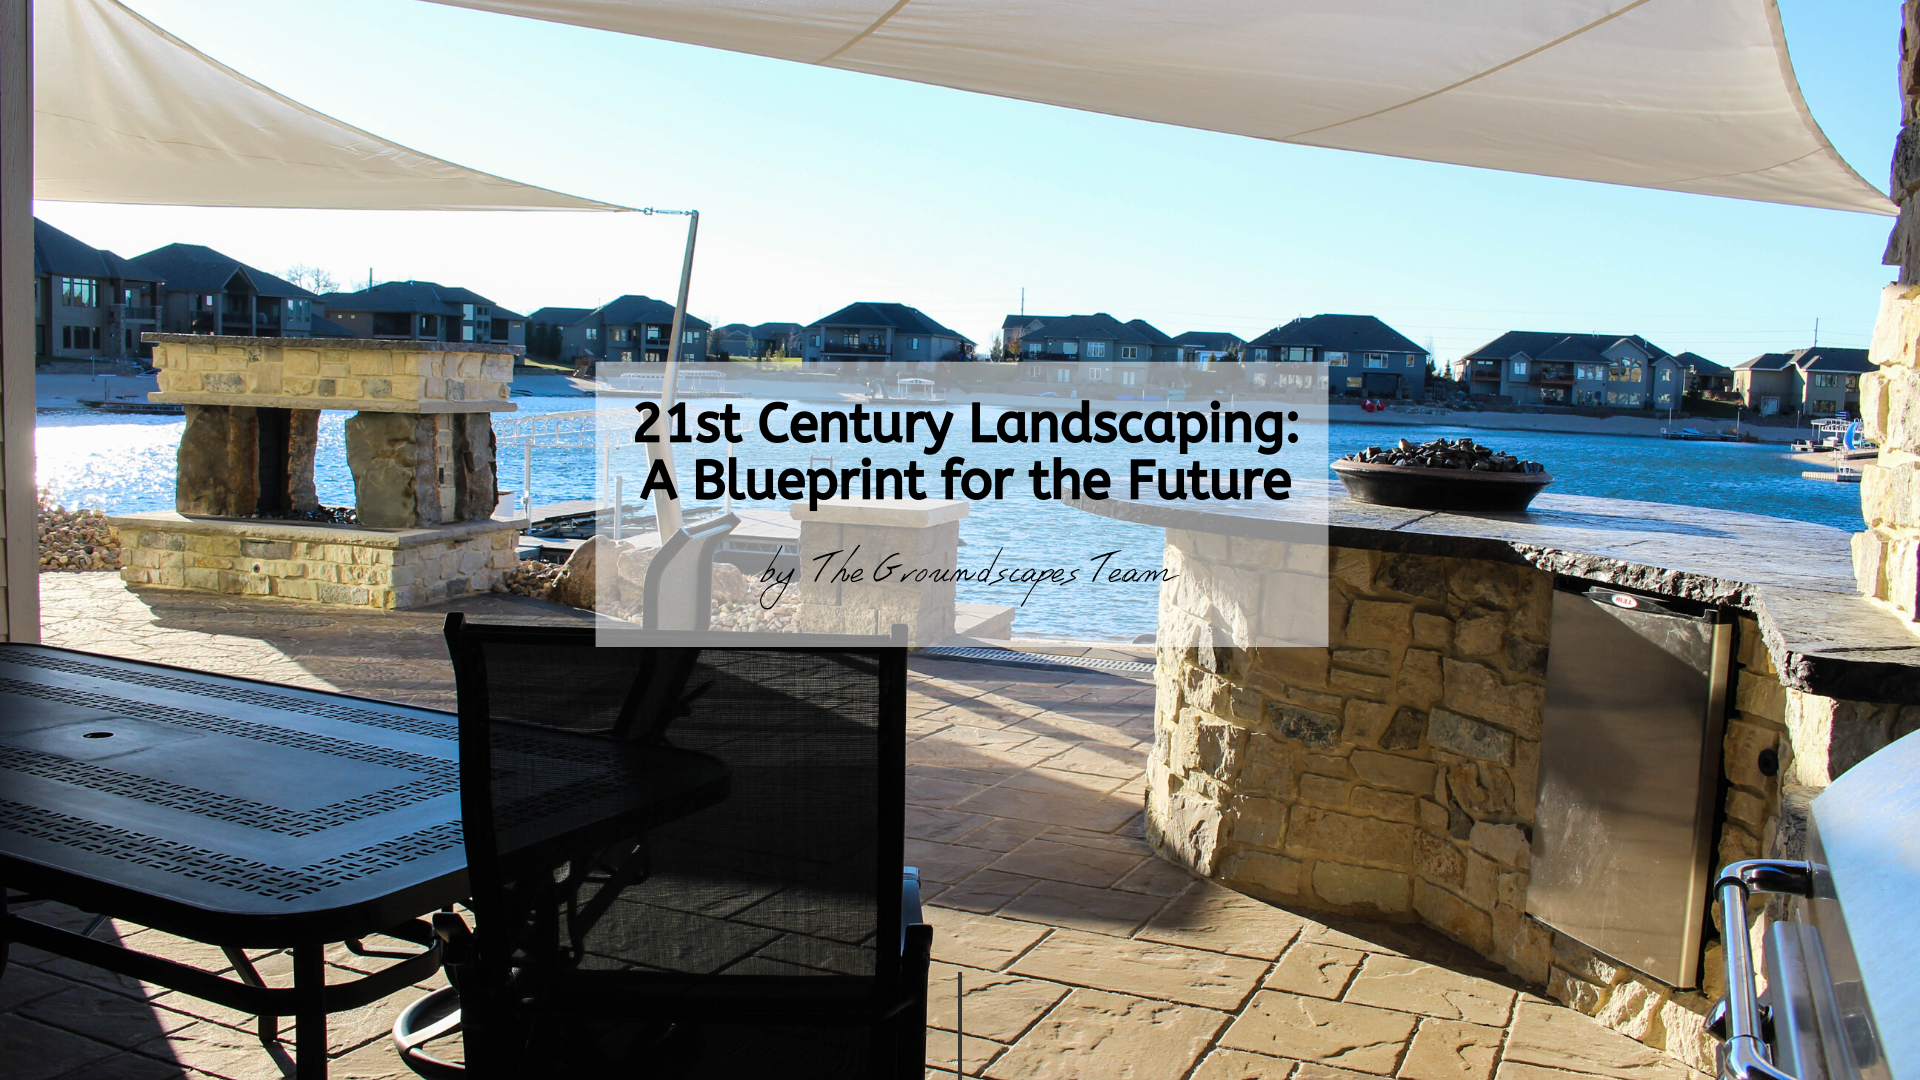 21st Century Landscaping: A Blueprint for the Future